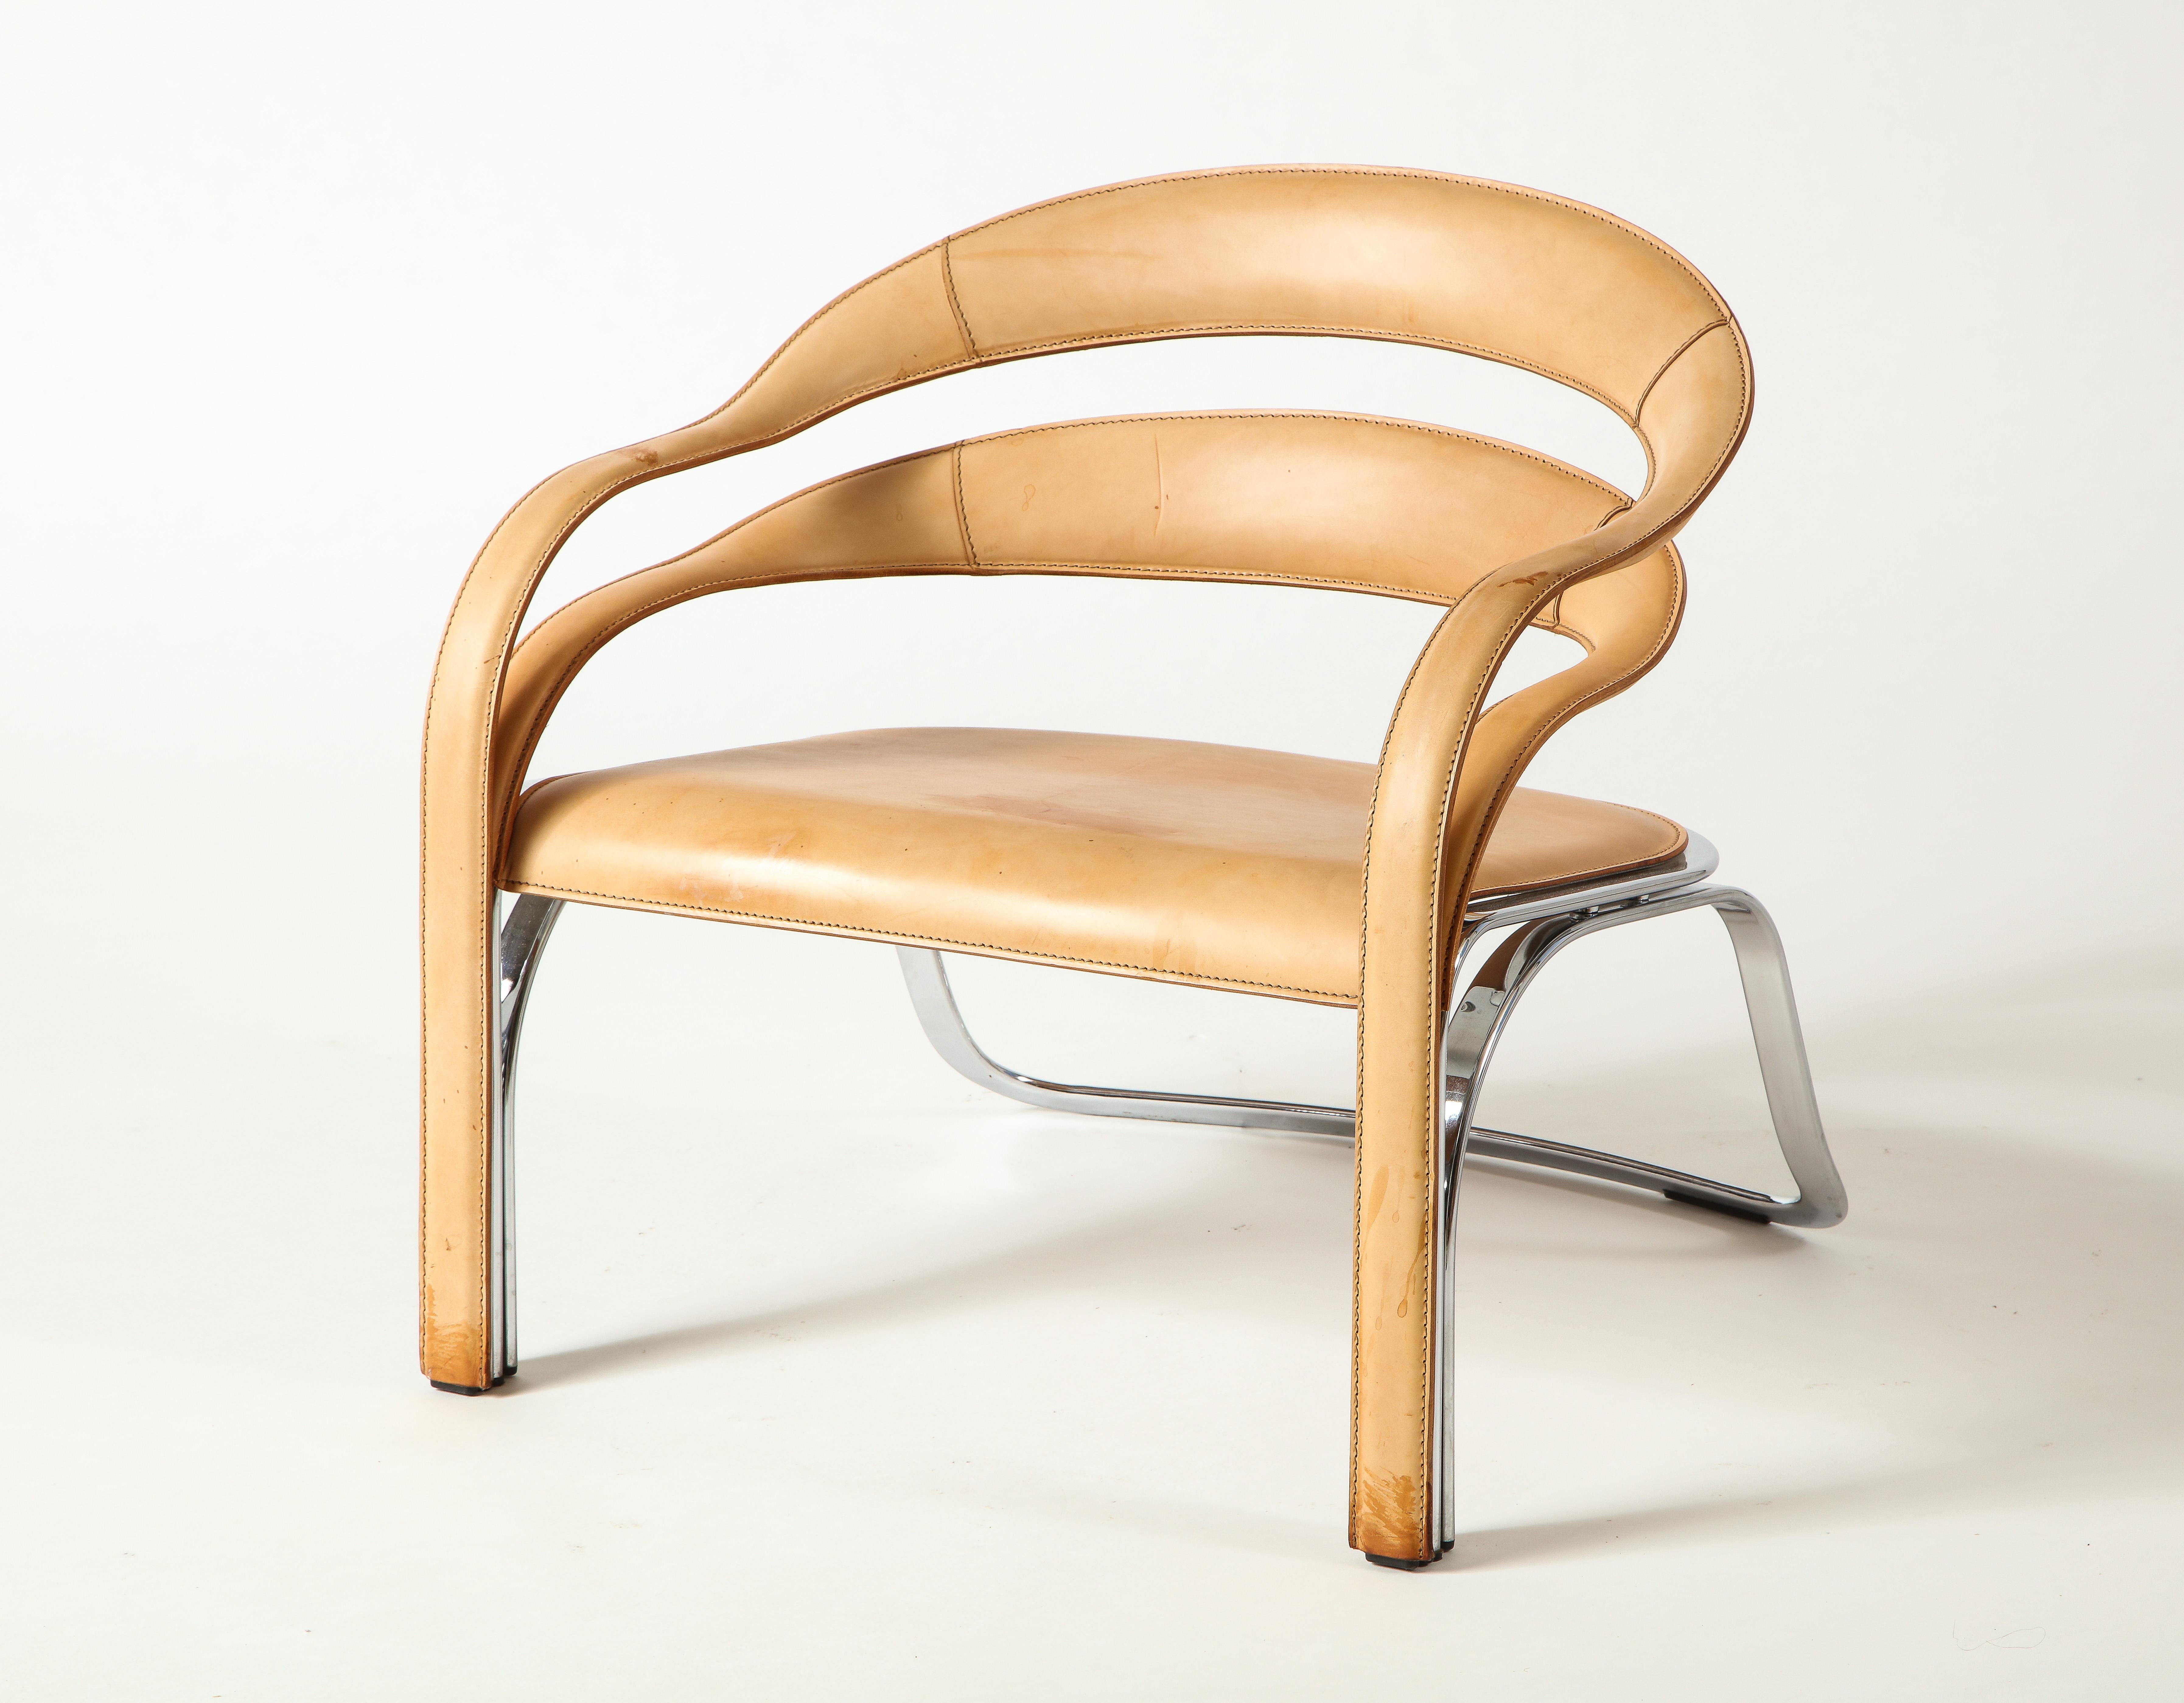 The kinetic lines of the Fettucini Chair fold together and gracefully join along the legs, drawing the eye across each contour.The floating backrest flows into twisting curves of the arms, with a precision reflecting the rigorous intention in